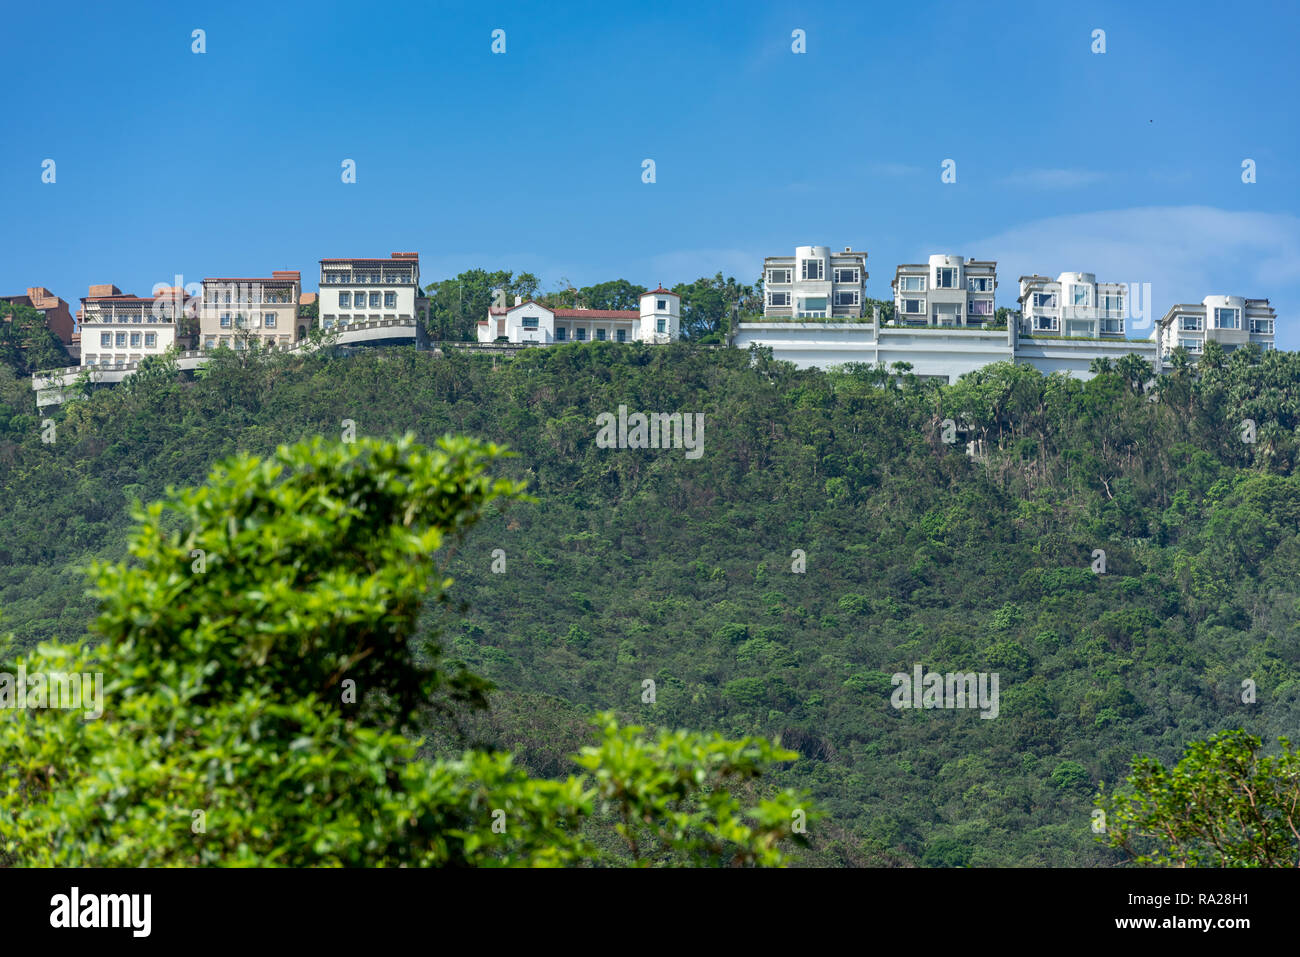 These luxurious homes along Peak Road in Hong Kong have spectacular views over Aberdeen Country Park, the twin reservoirs, and Deep Water Bay. Stock Photo